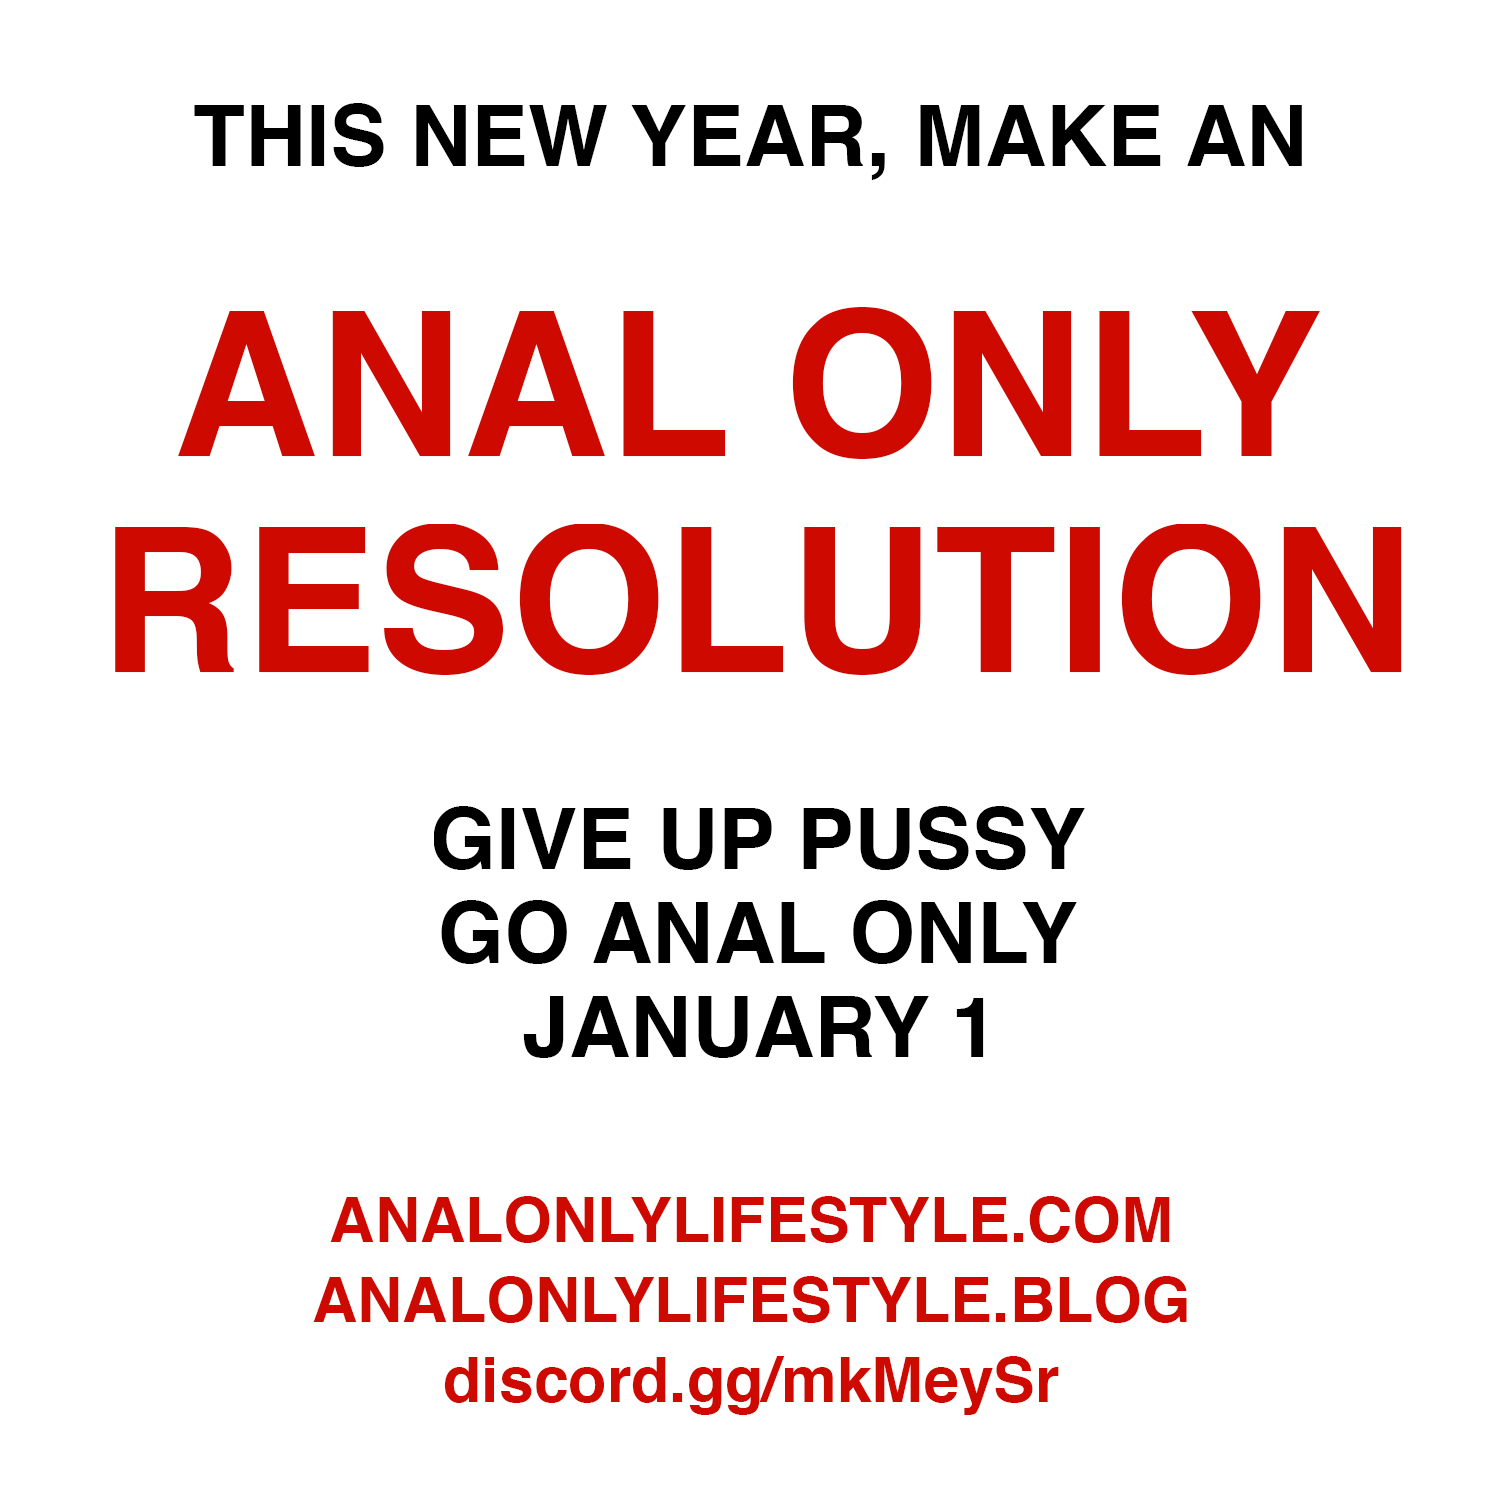 This New Year, Make an Anal Only Resolution. Give up pussy, go anal only, January 1.